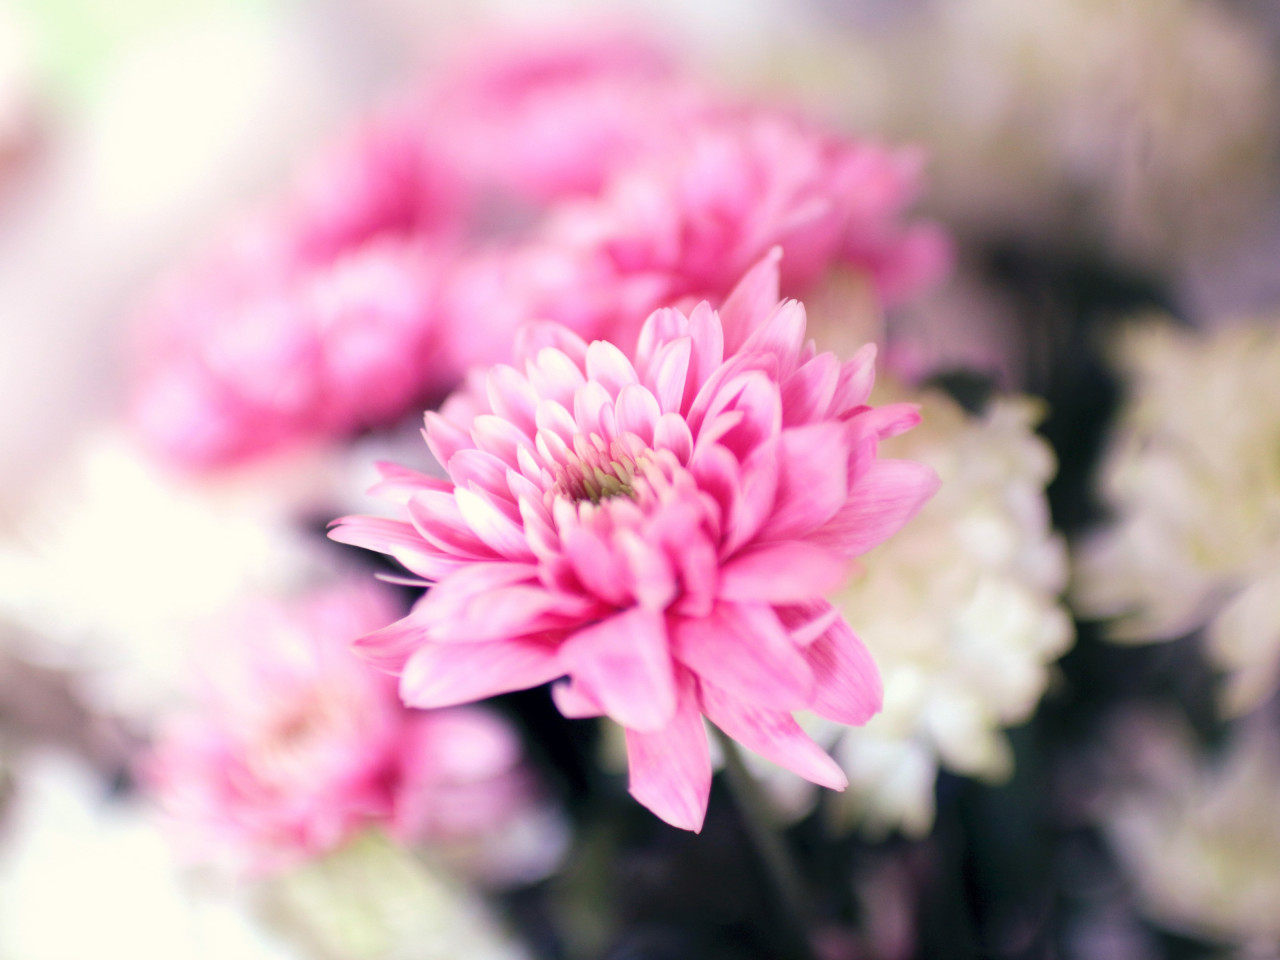 Download wallpaper: Pink and white flowers 1280x960